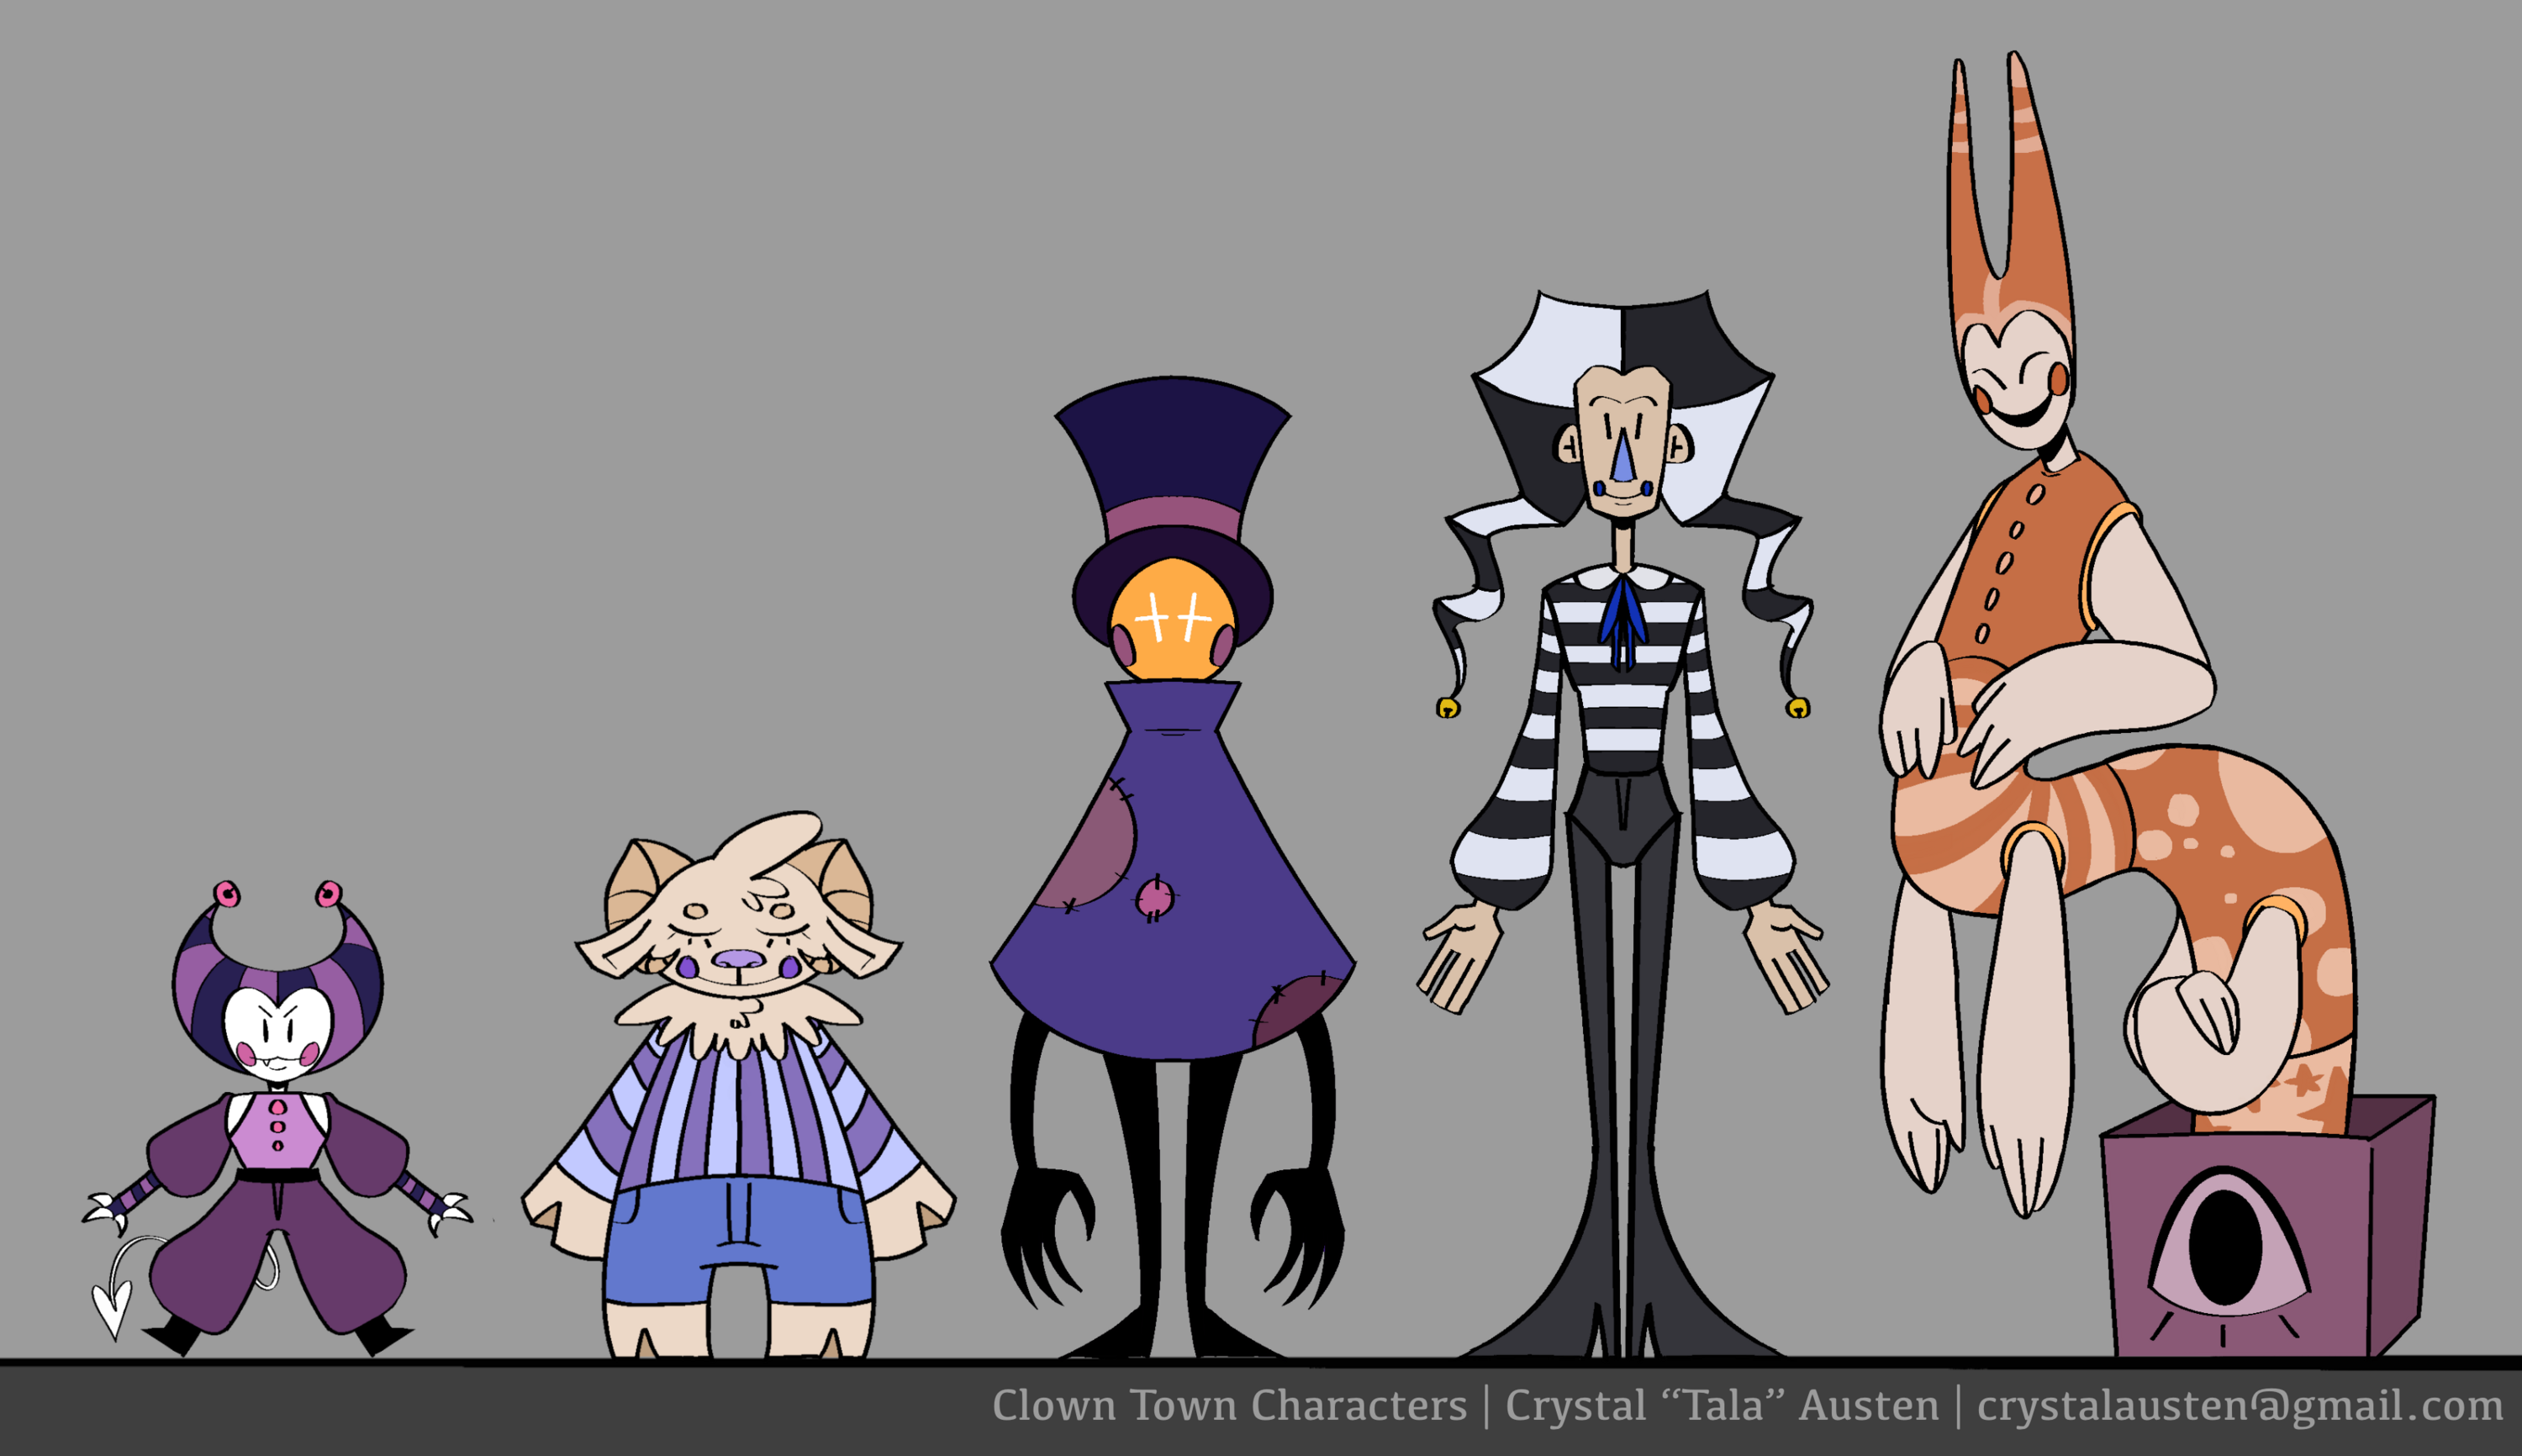 Character Lineup for "Clown Town"